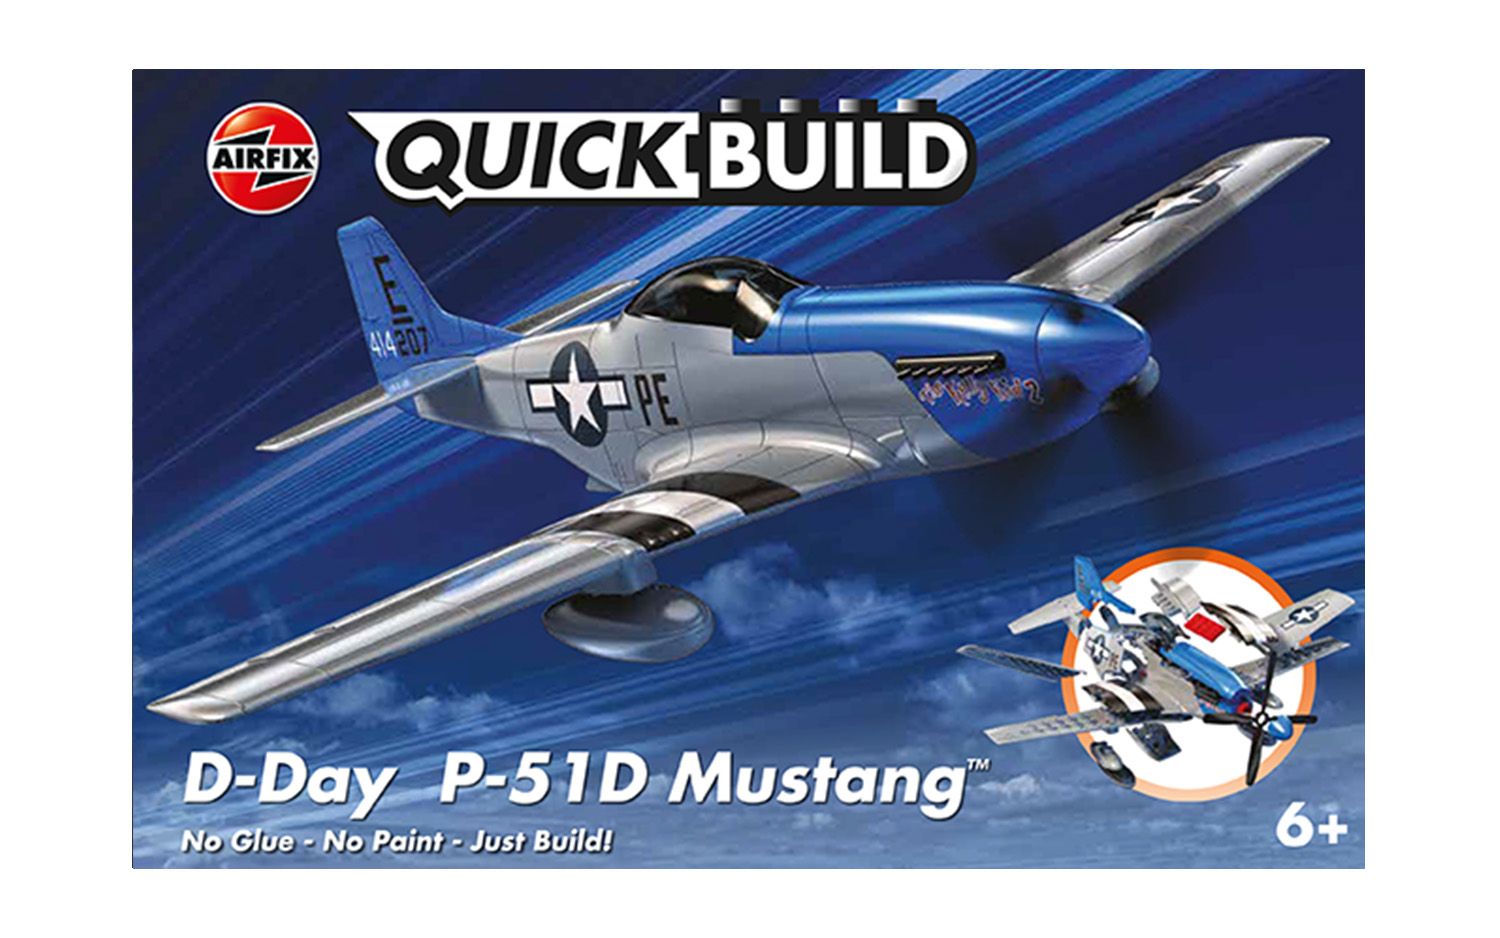 Airfix QUICKBUILD D-Day P-51D Mustang - Loaded Dice Barry Vale of Glamorgan CF64 3HD